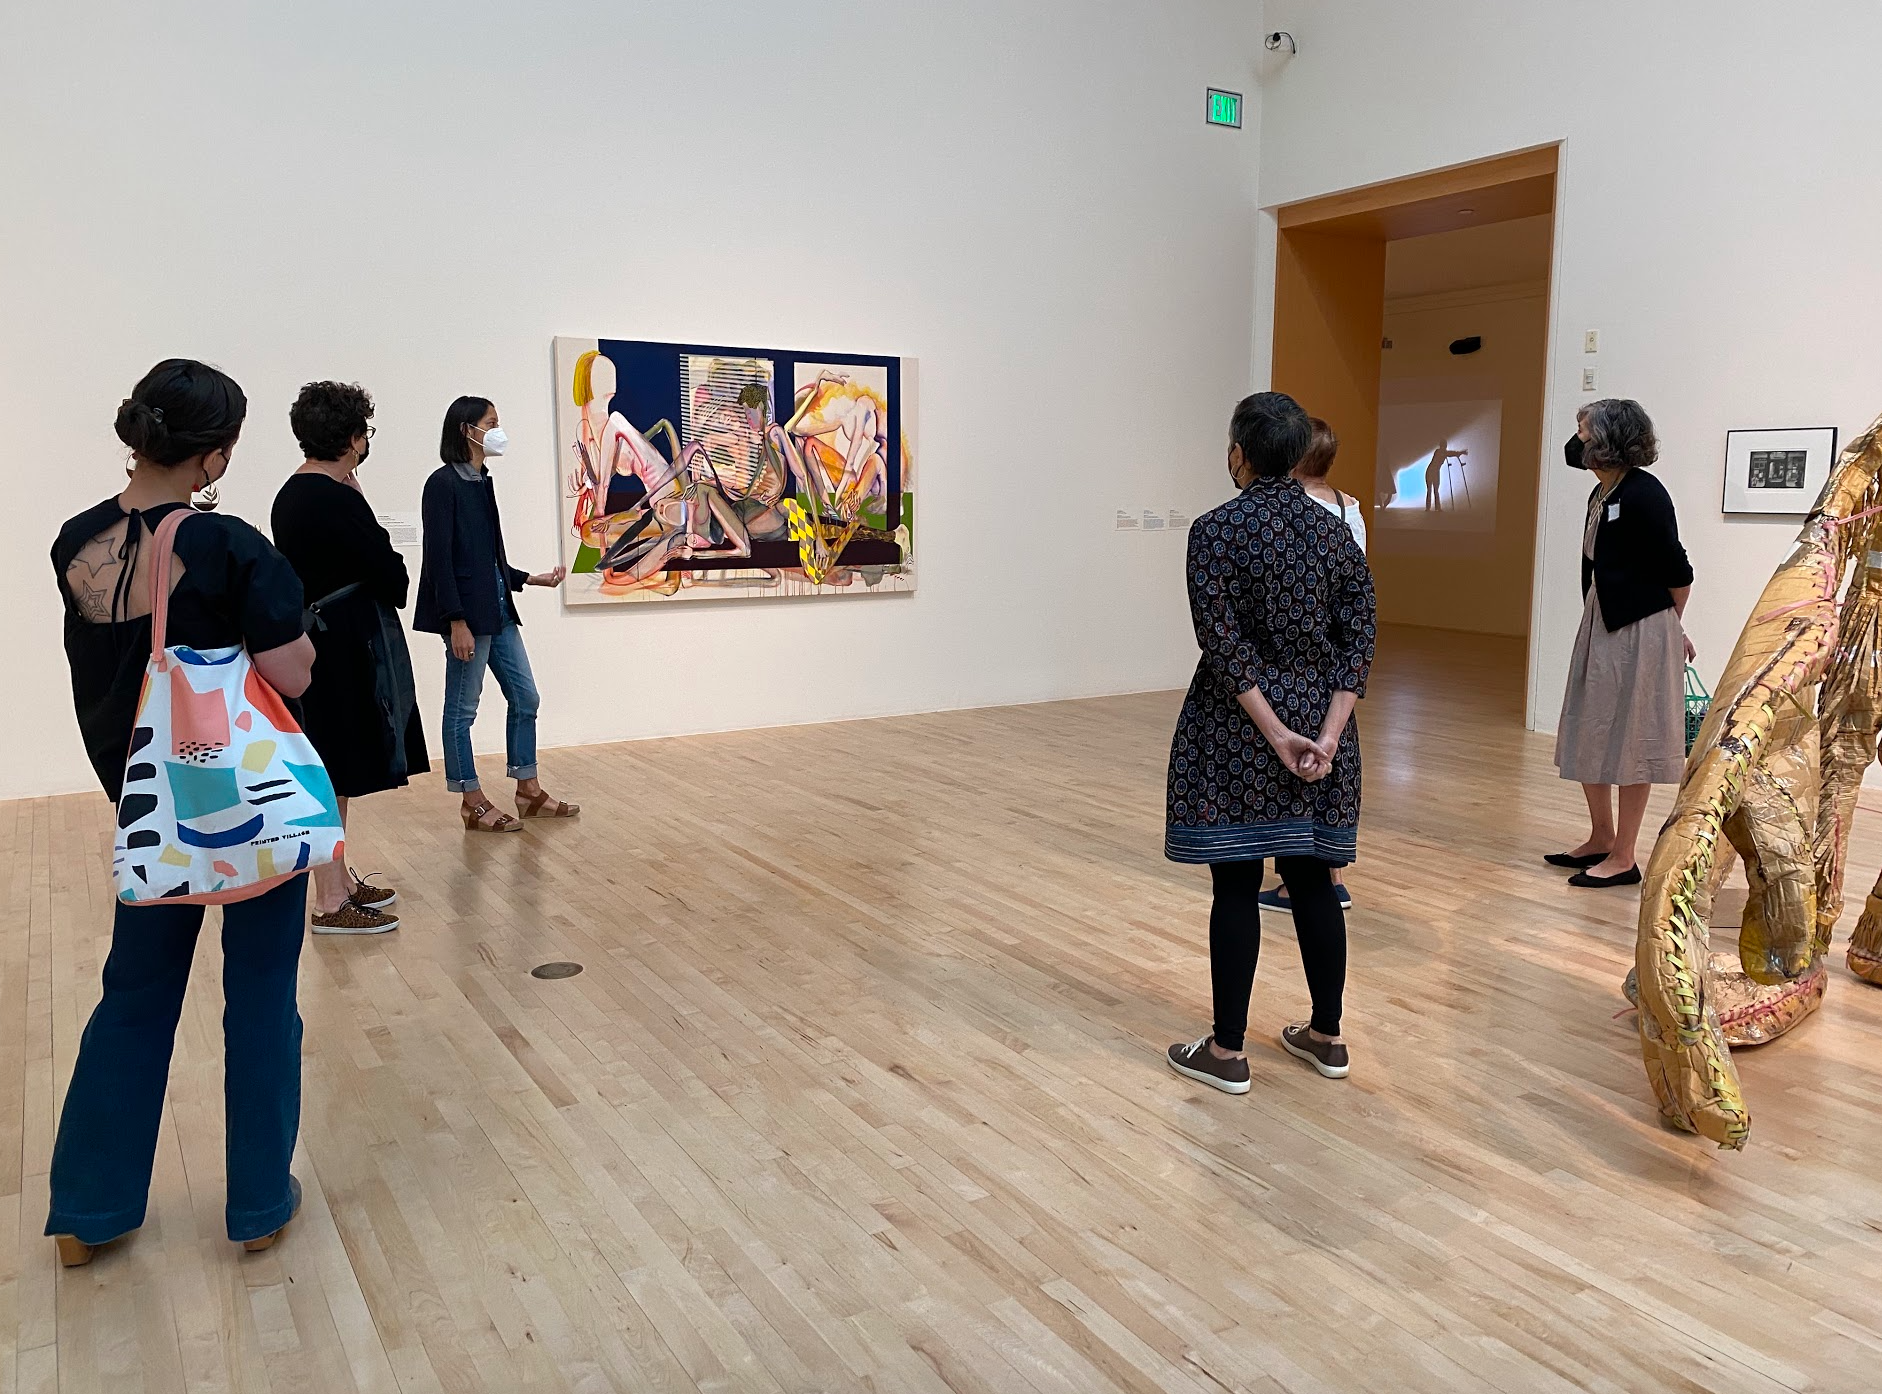 A group of women look at a painting in a museum